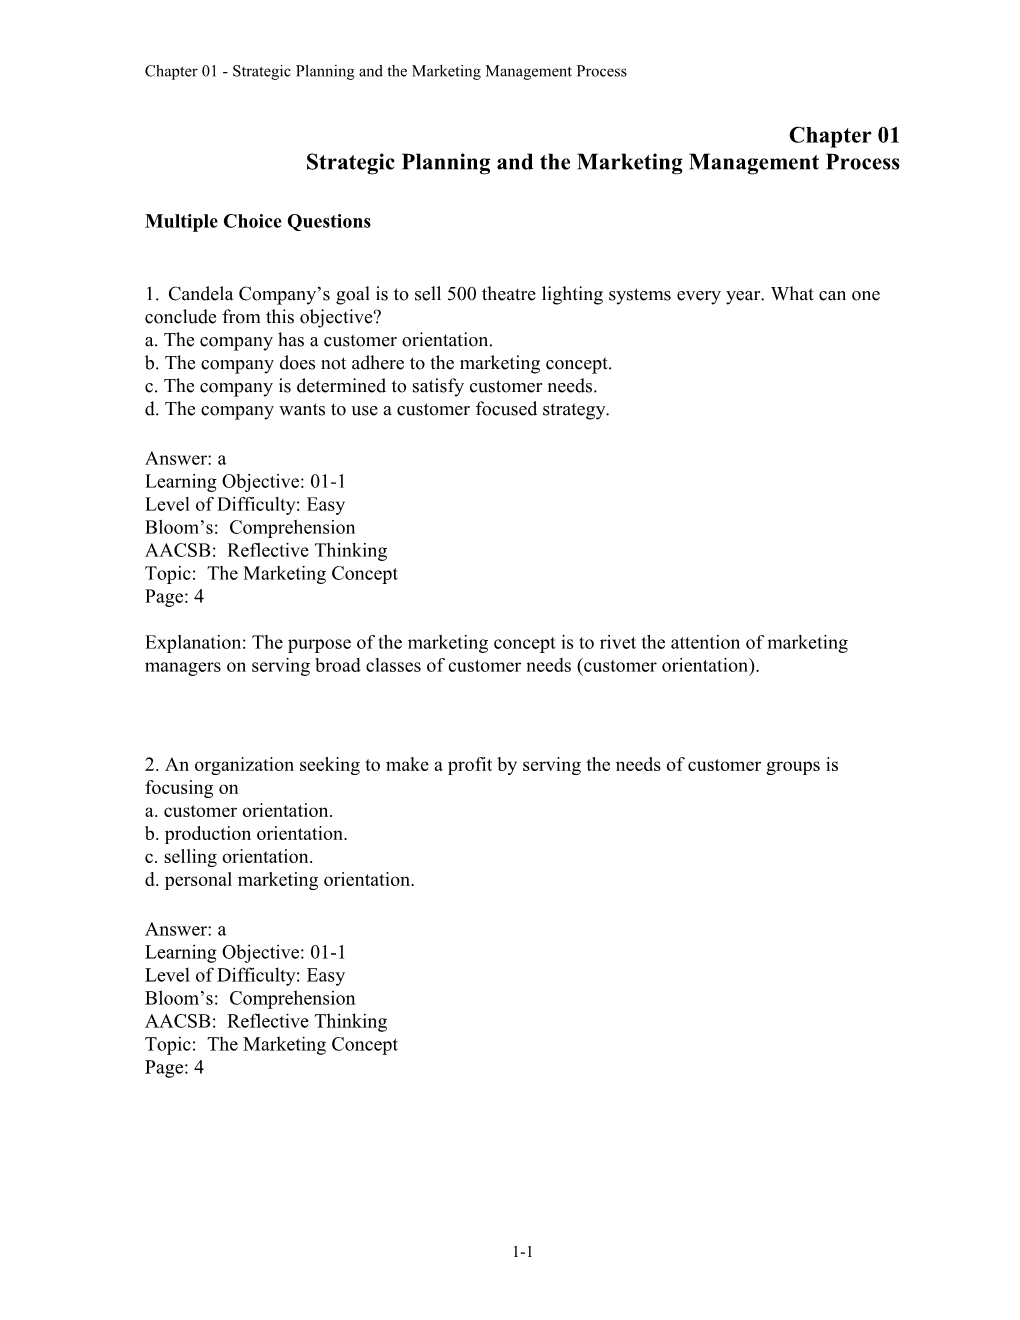 Chapter 01 Strategic Planning and the Marketing Management s1